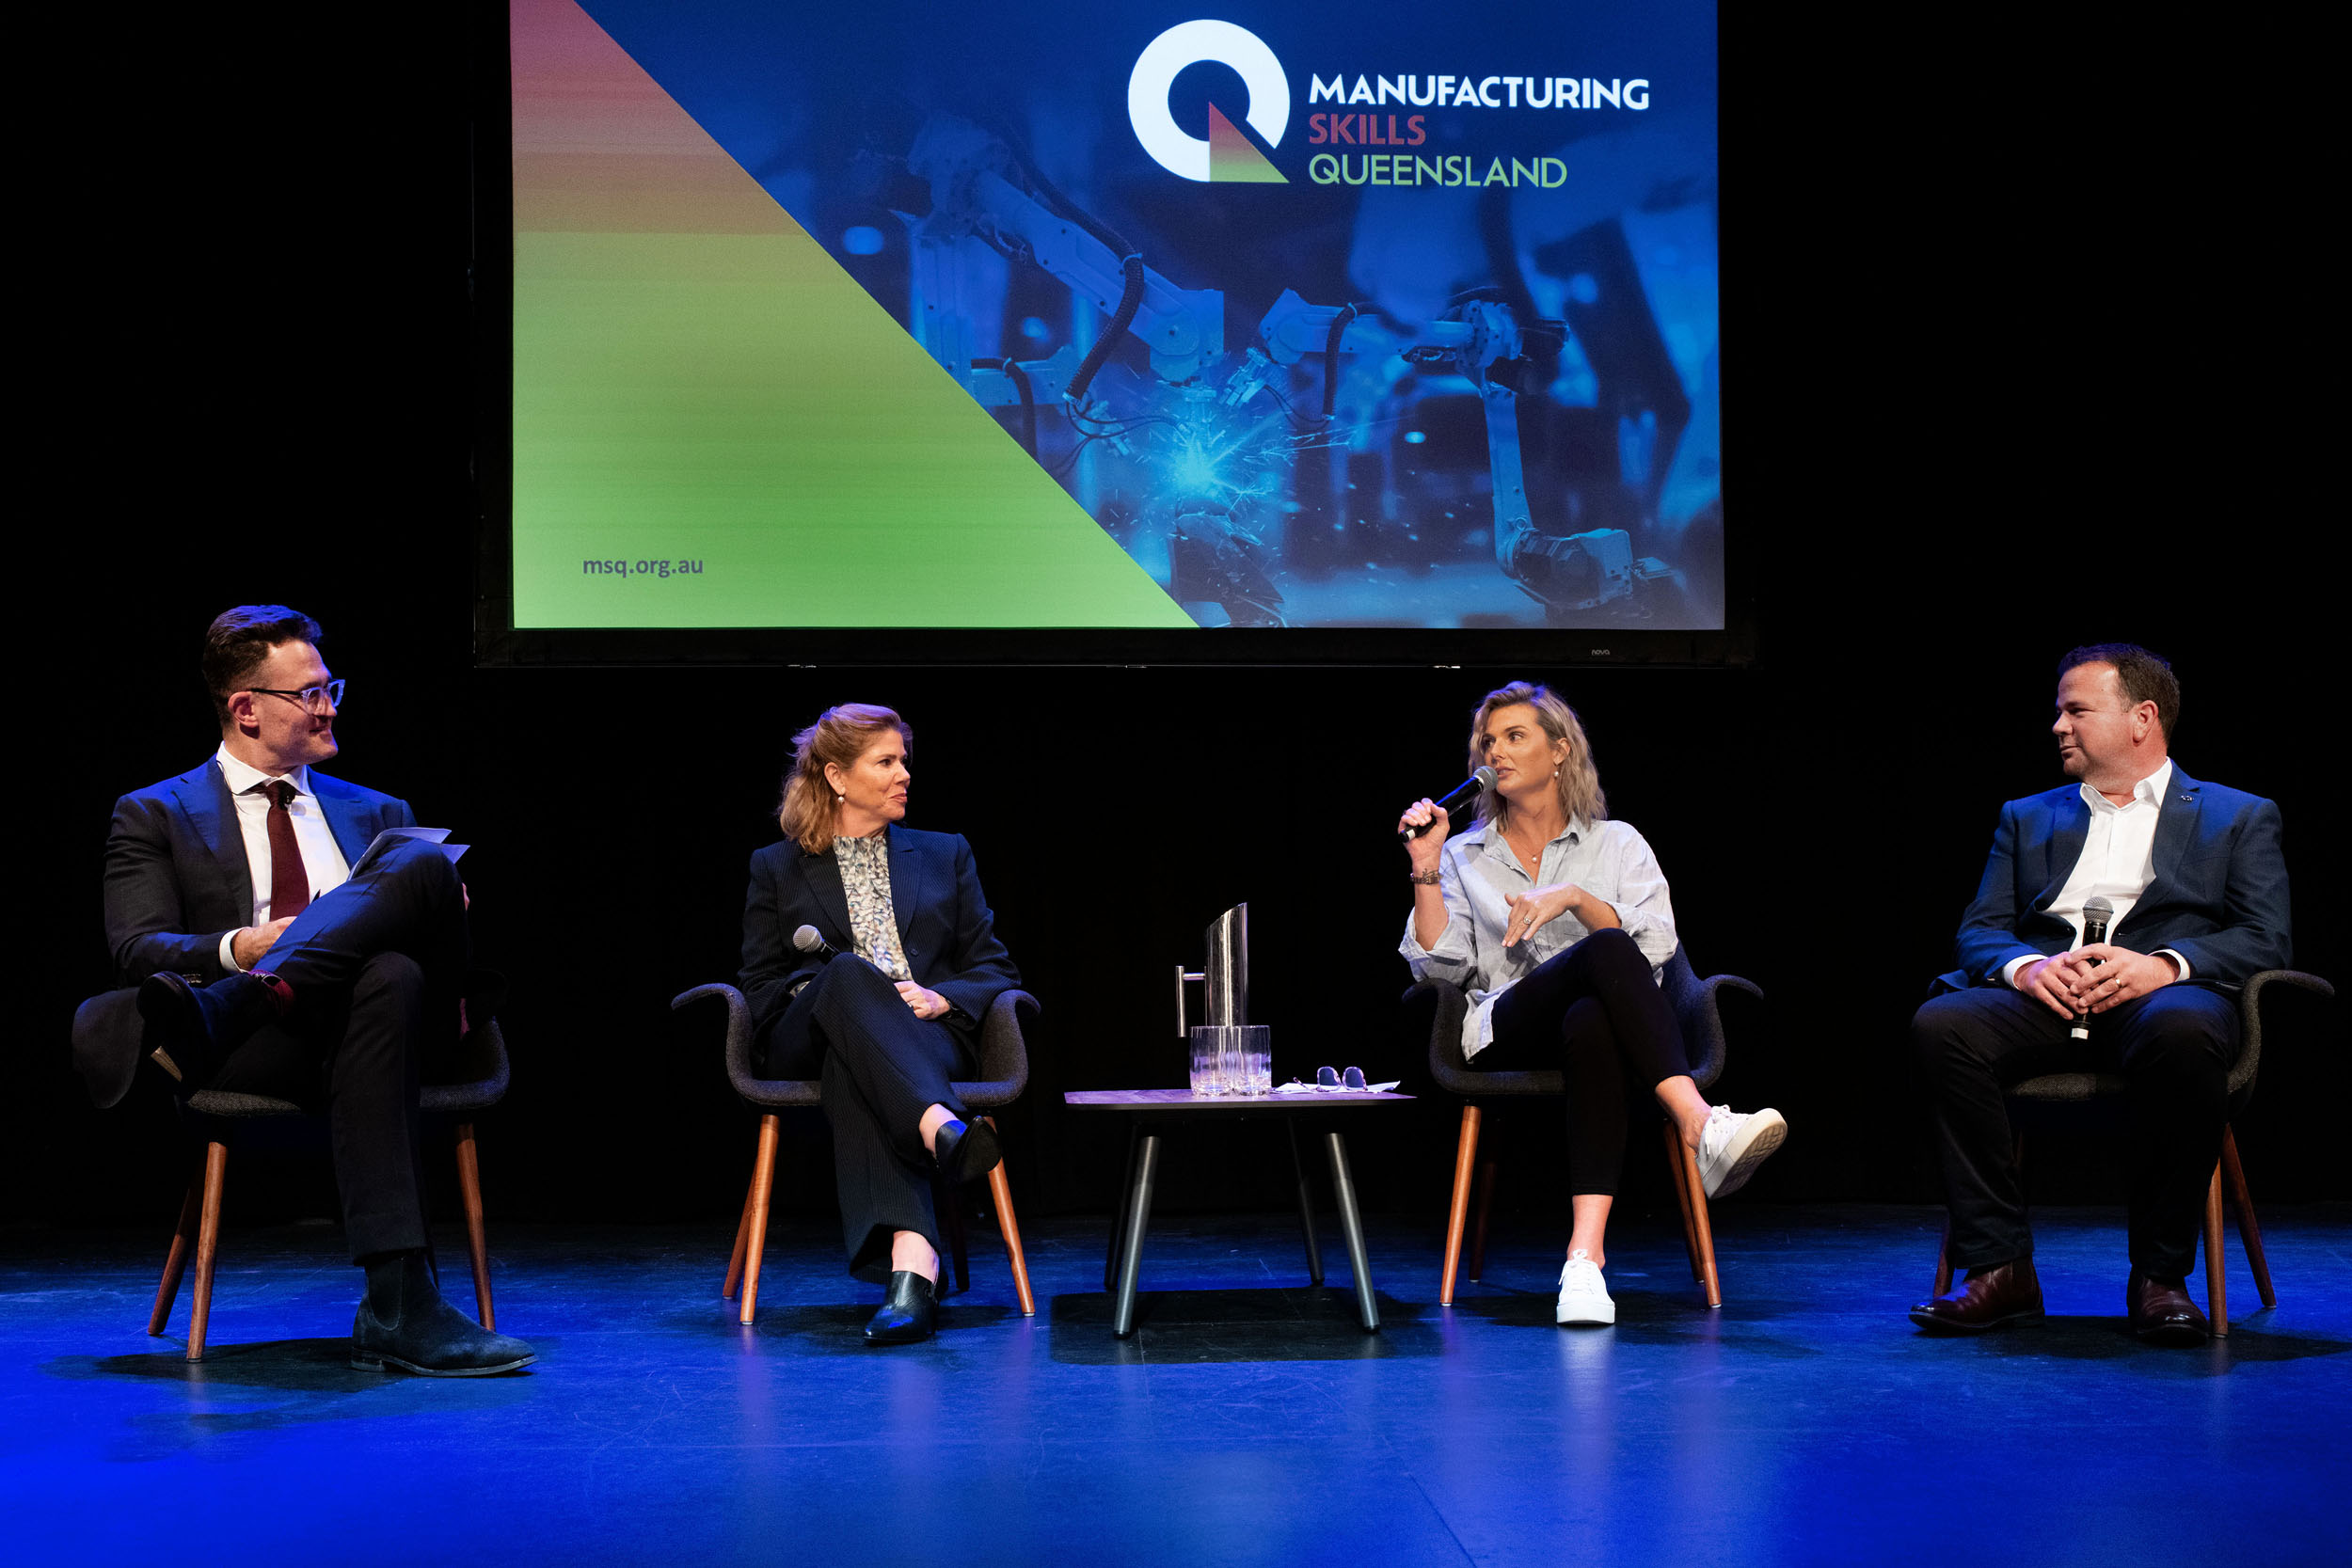 Manufacturing Skills Queensland’s inaugural industry event